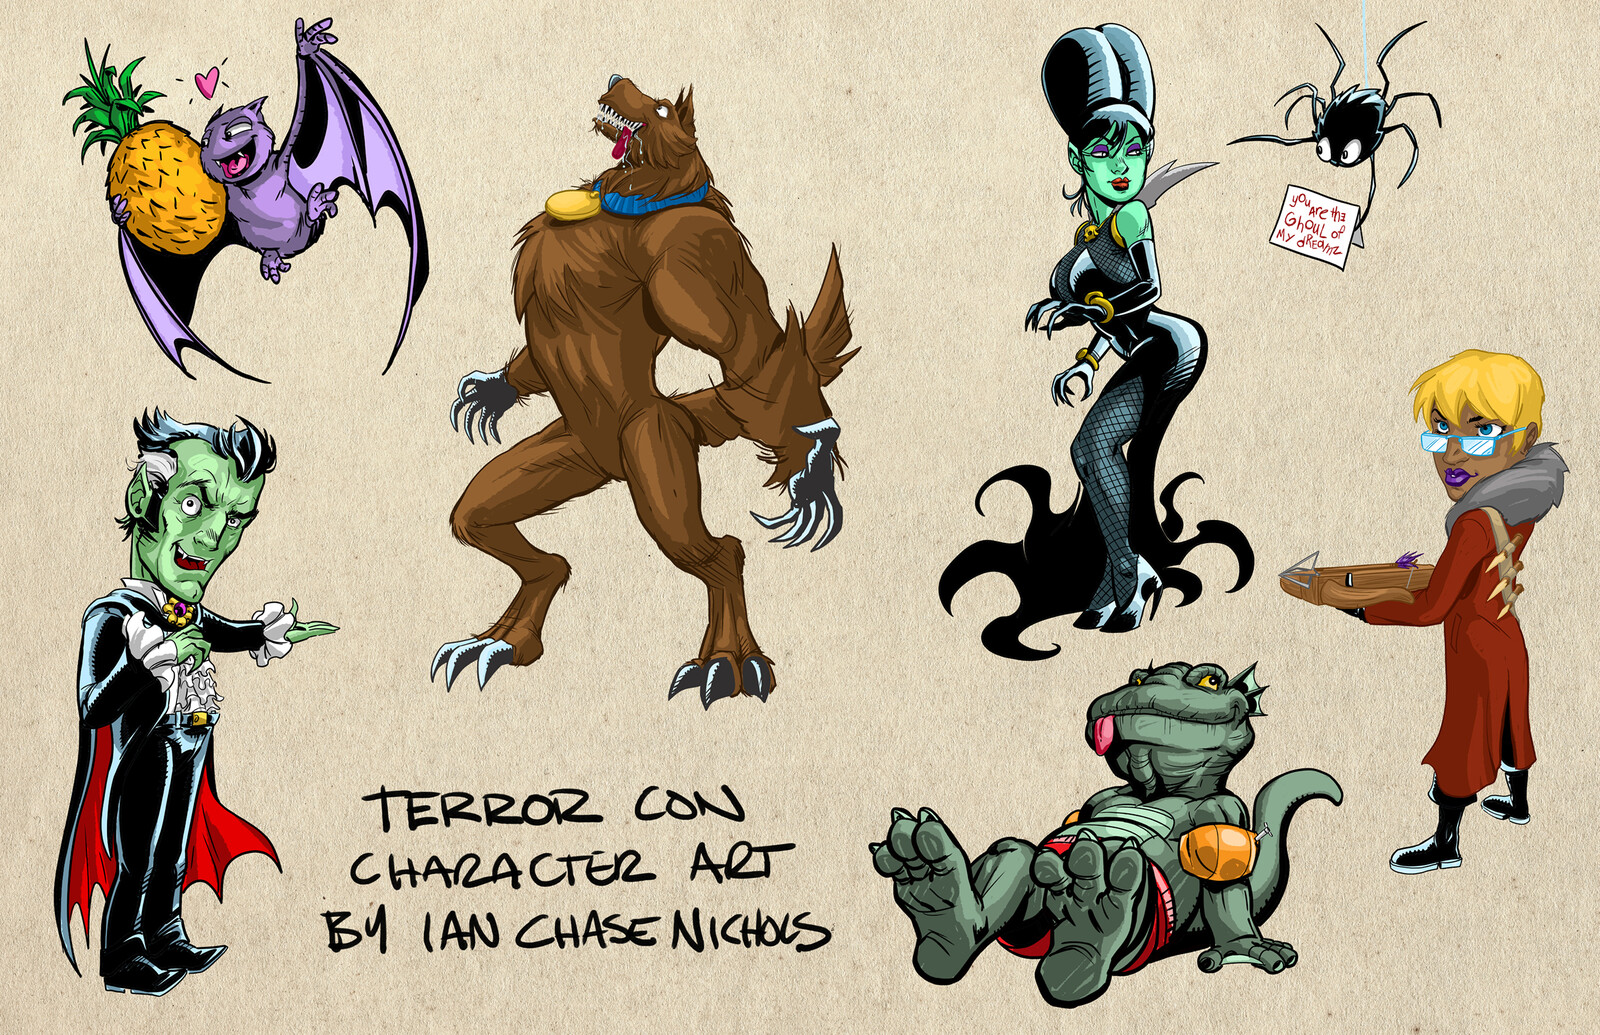 Character art had to fit with the horror themes, but be all-ages friendly. 